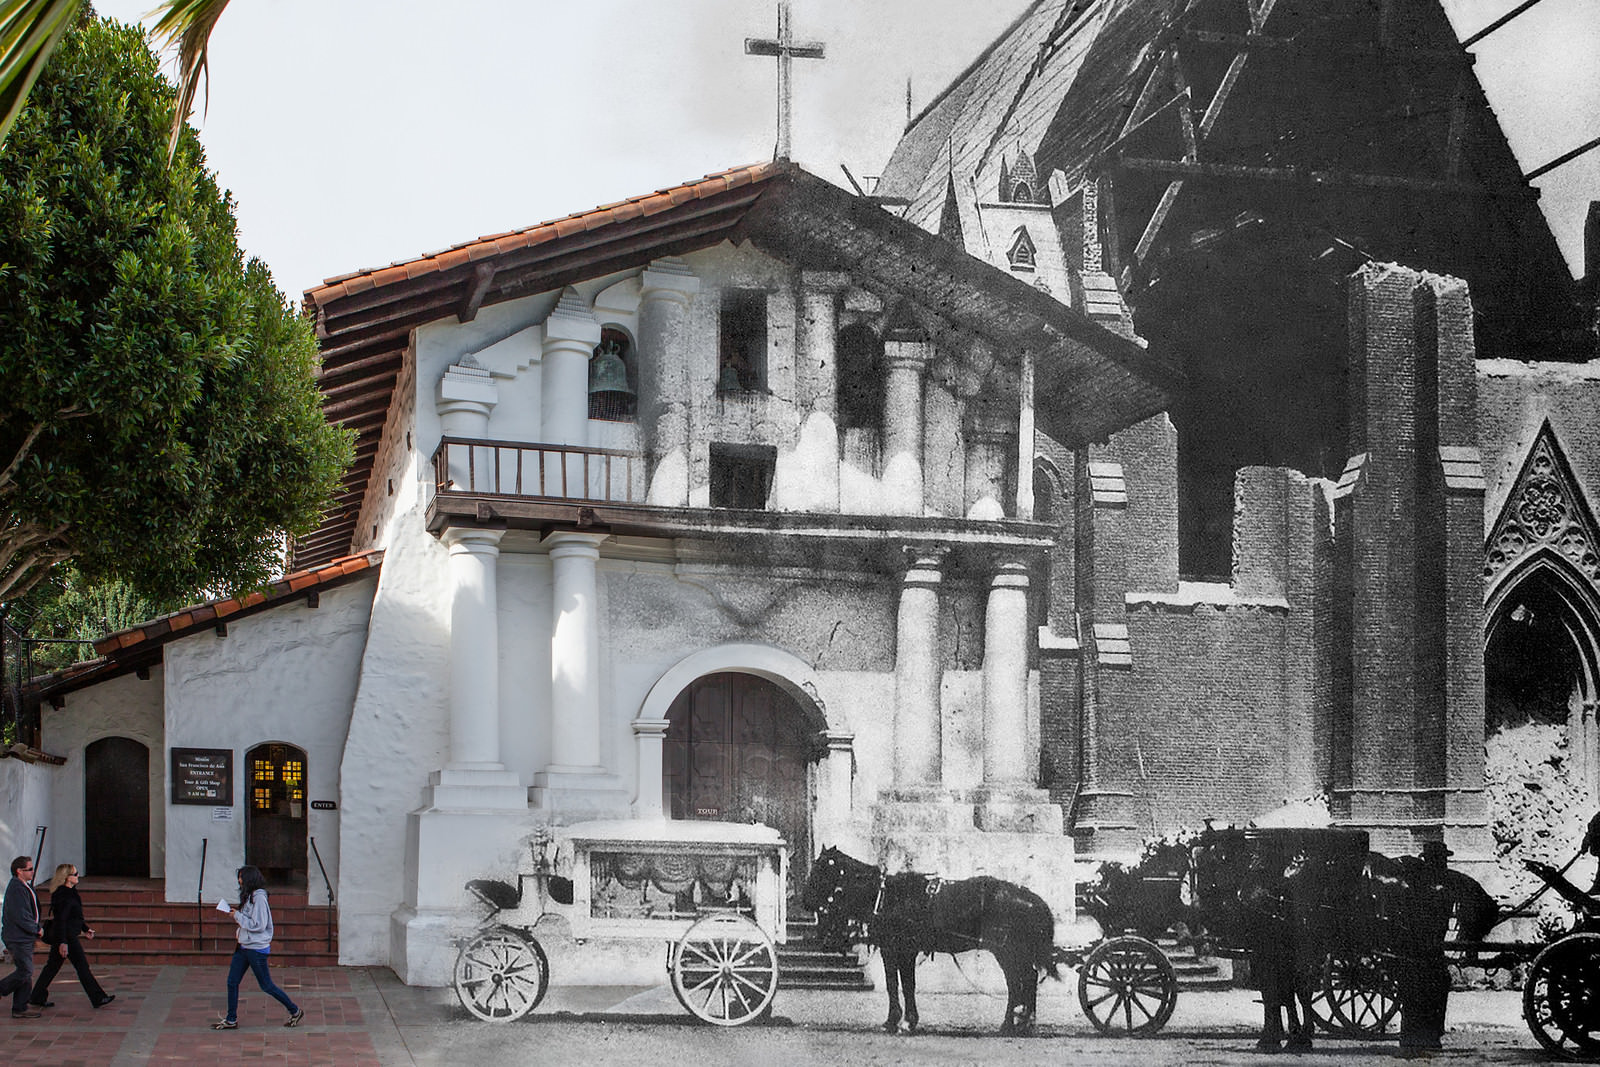 People stroll by the original adobe Mission Dolores which survived, while the brick church next door was destroyed